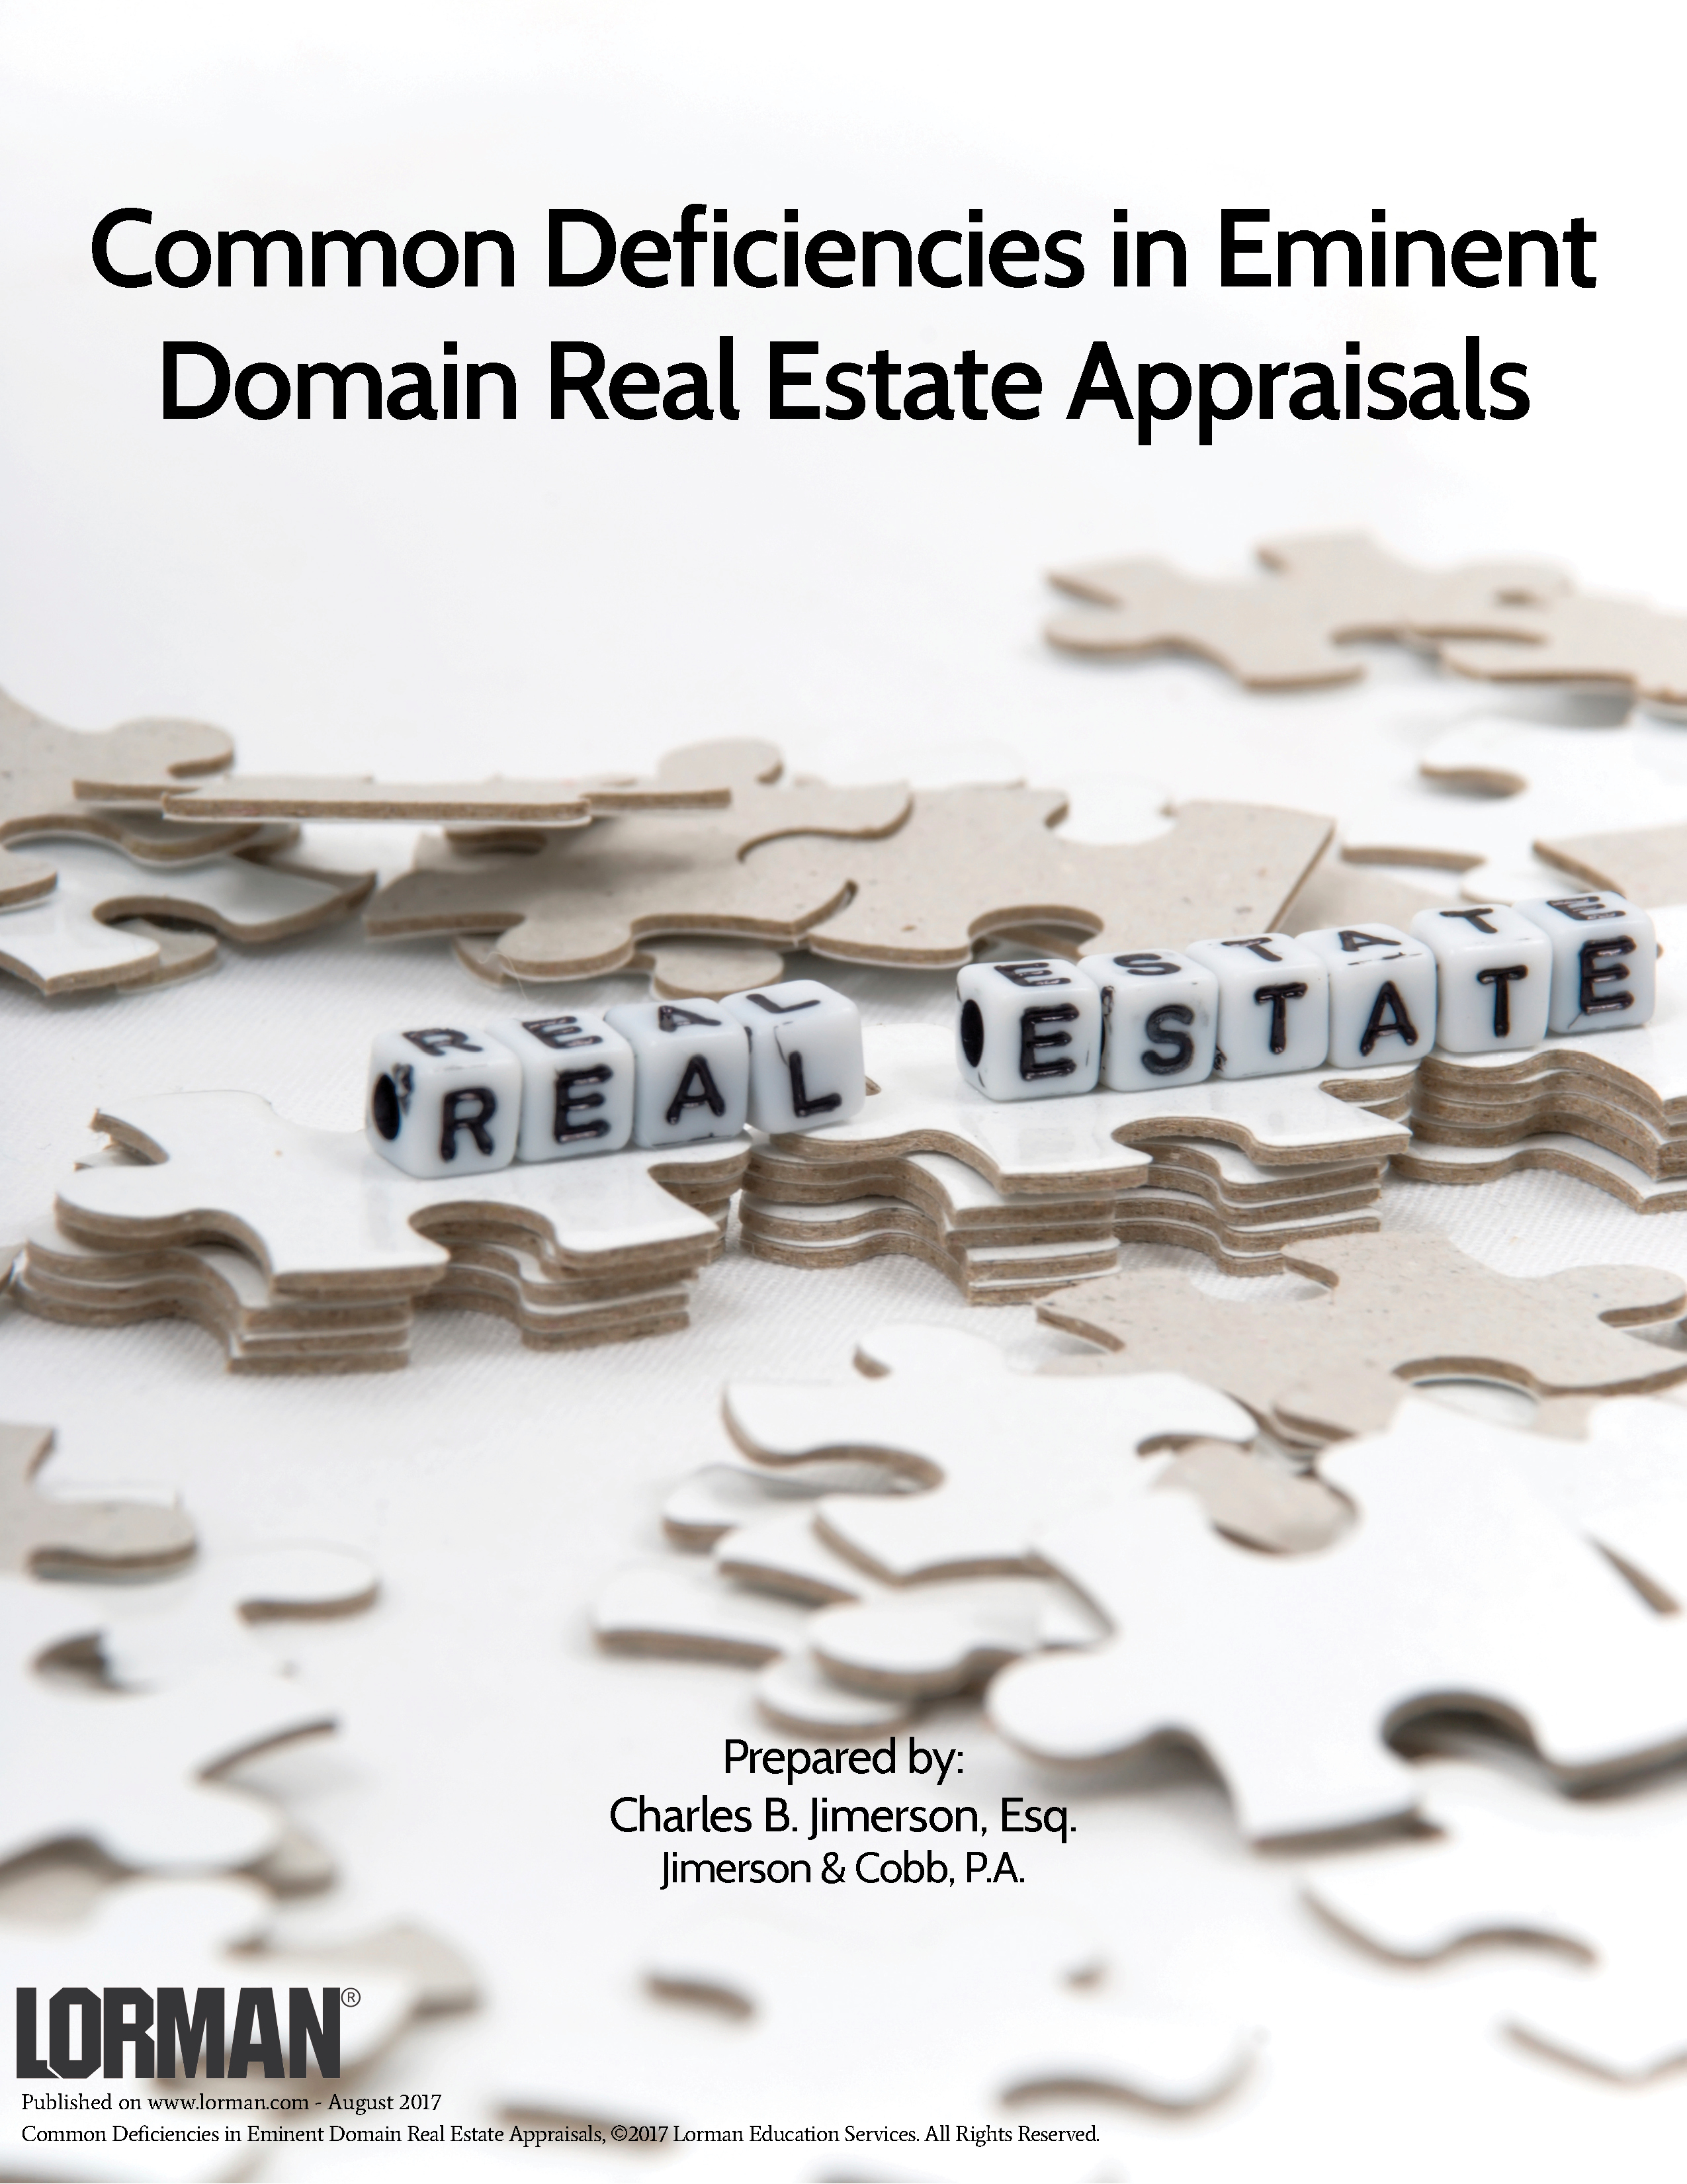 Common Deficiencies in Eminent Domain Real Estate Appraisals